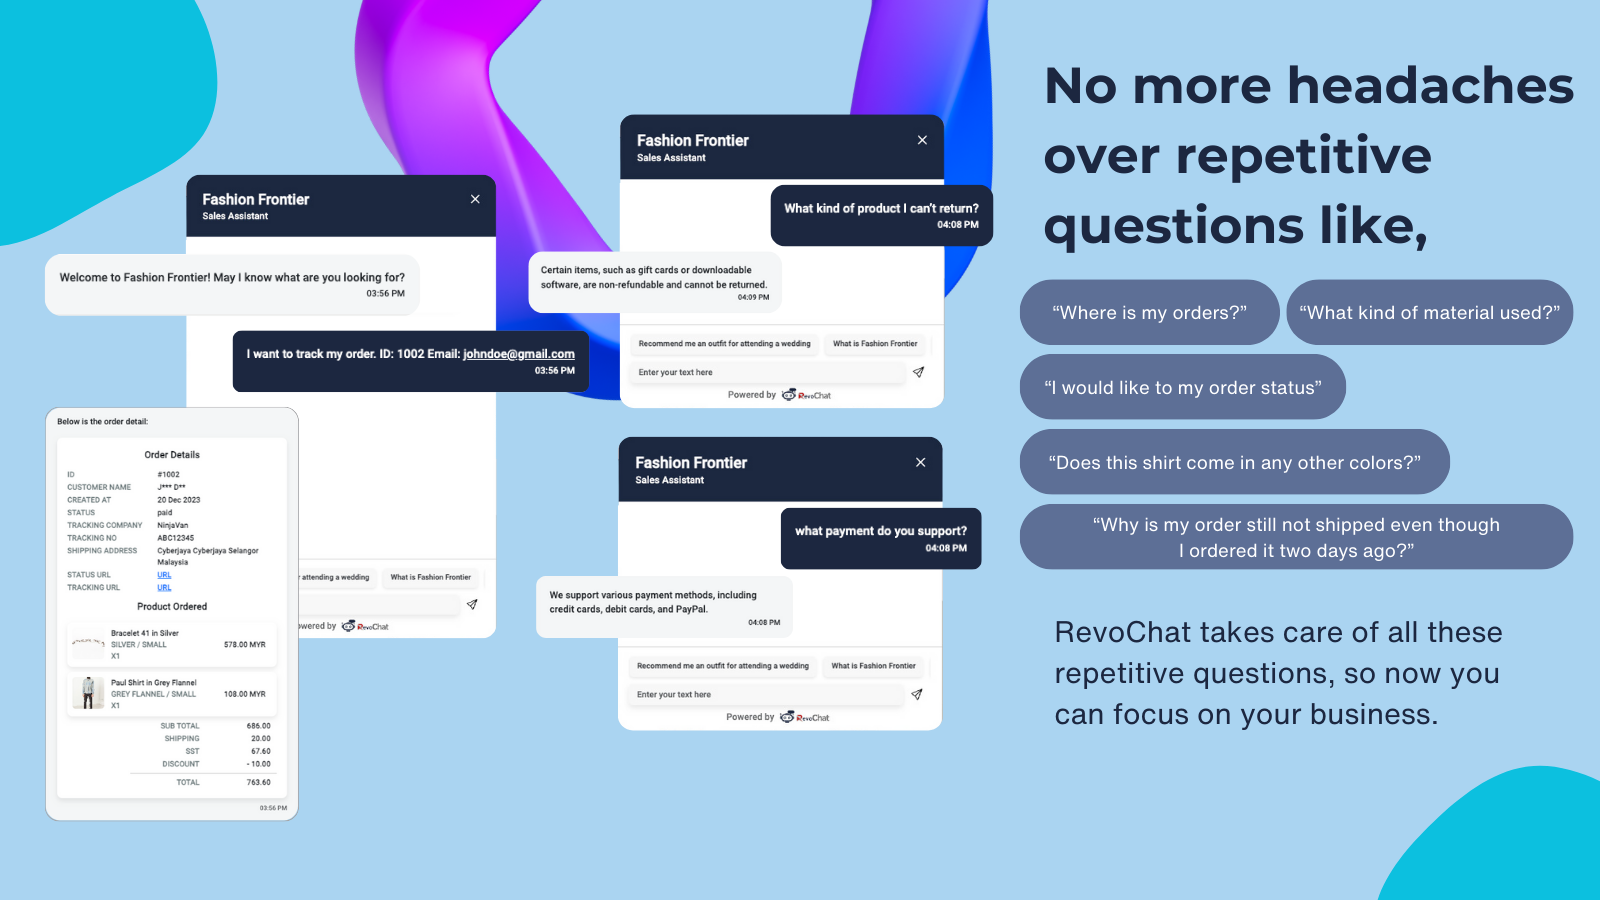 RevoChat resolves all your repetitive and headache questions